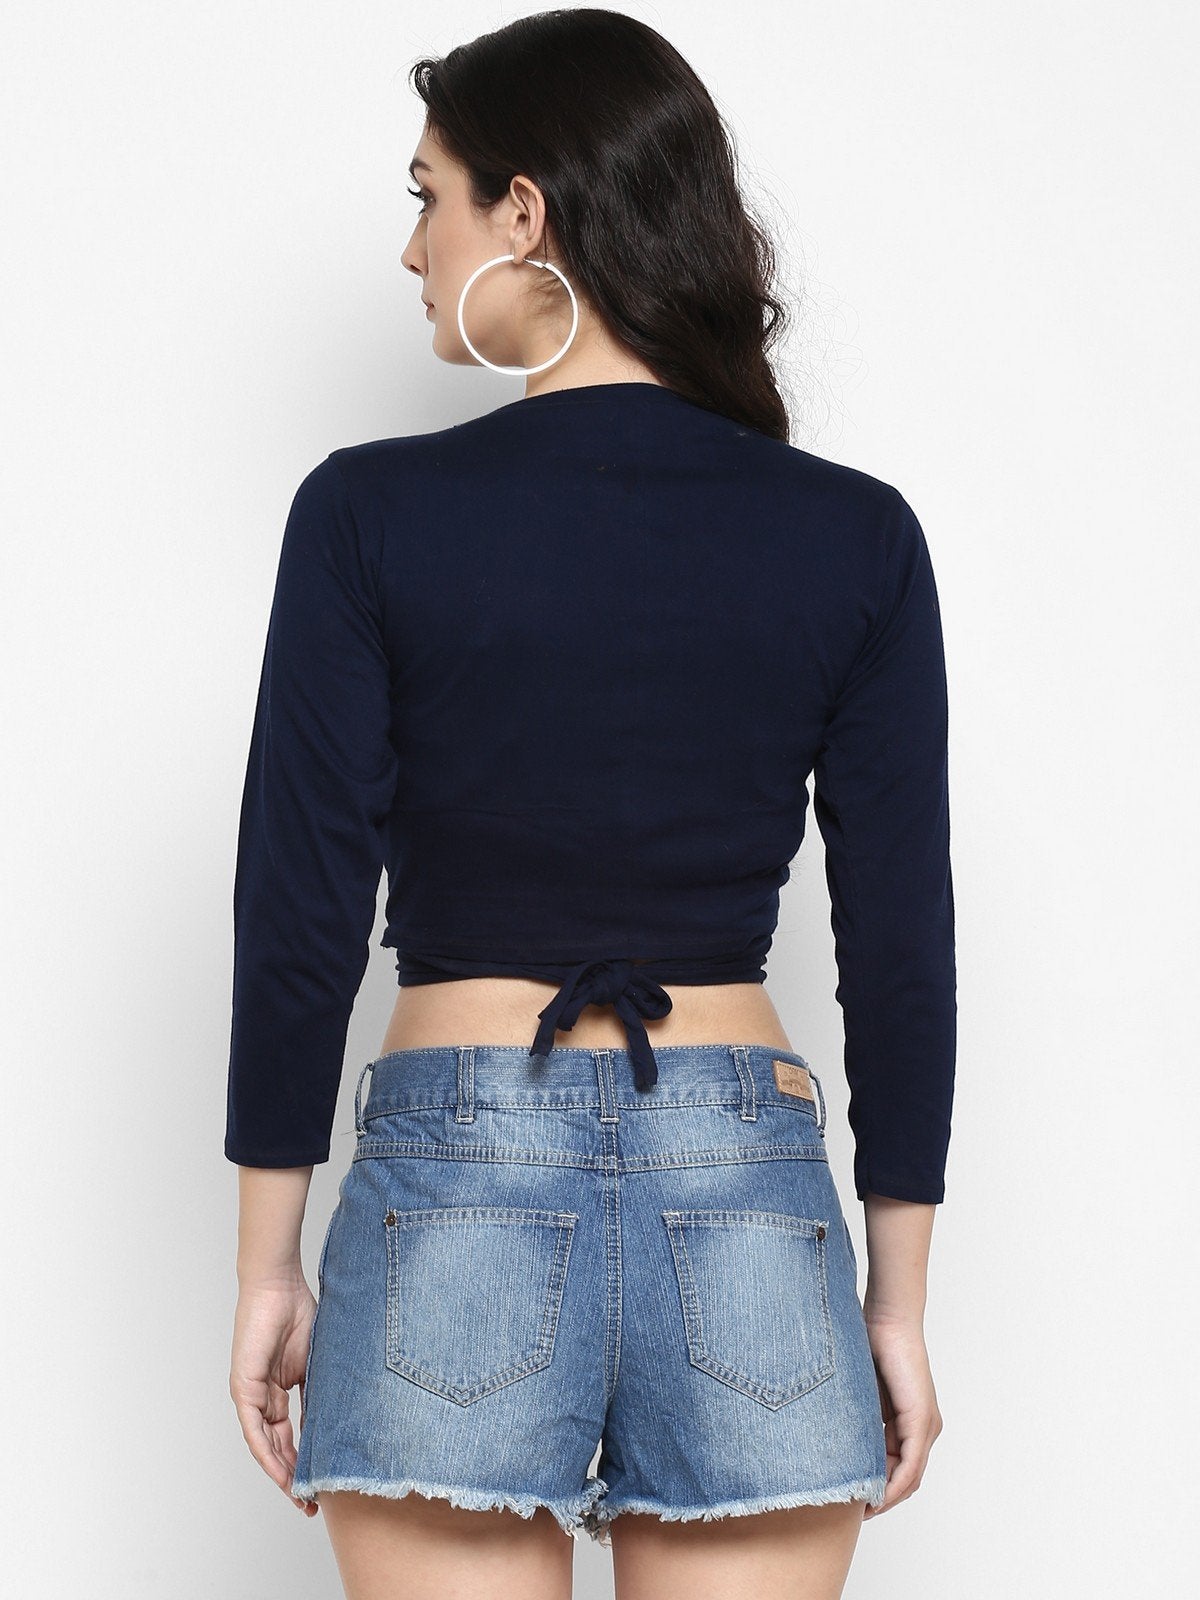 Women's Knitted Knot Style Crop Top - Pannkh